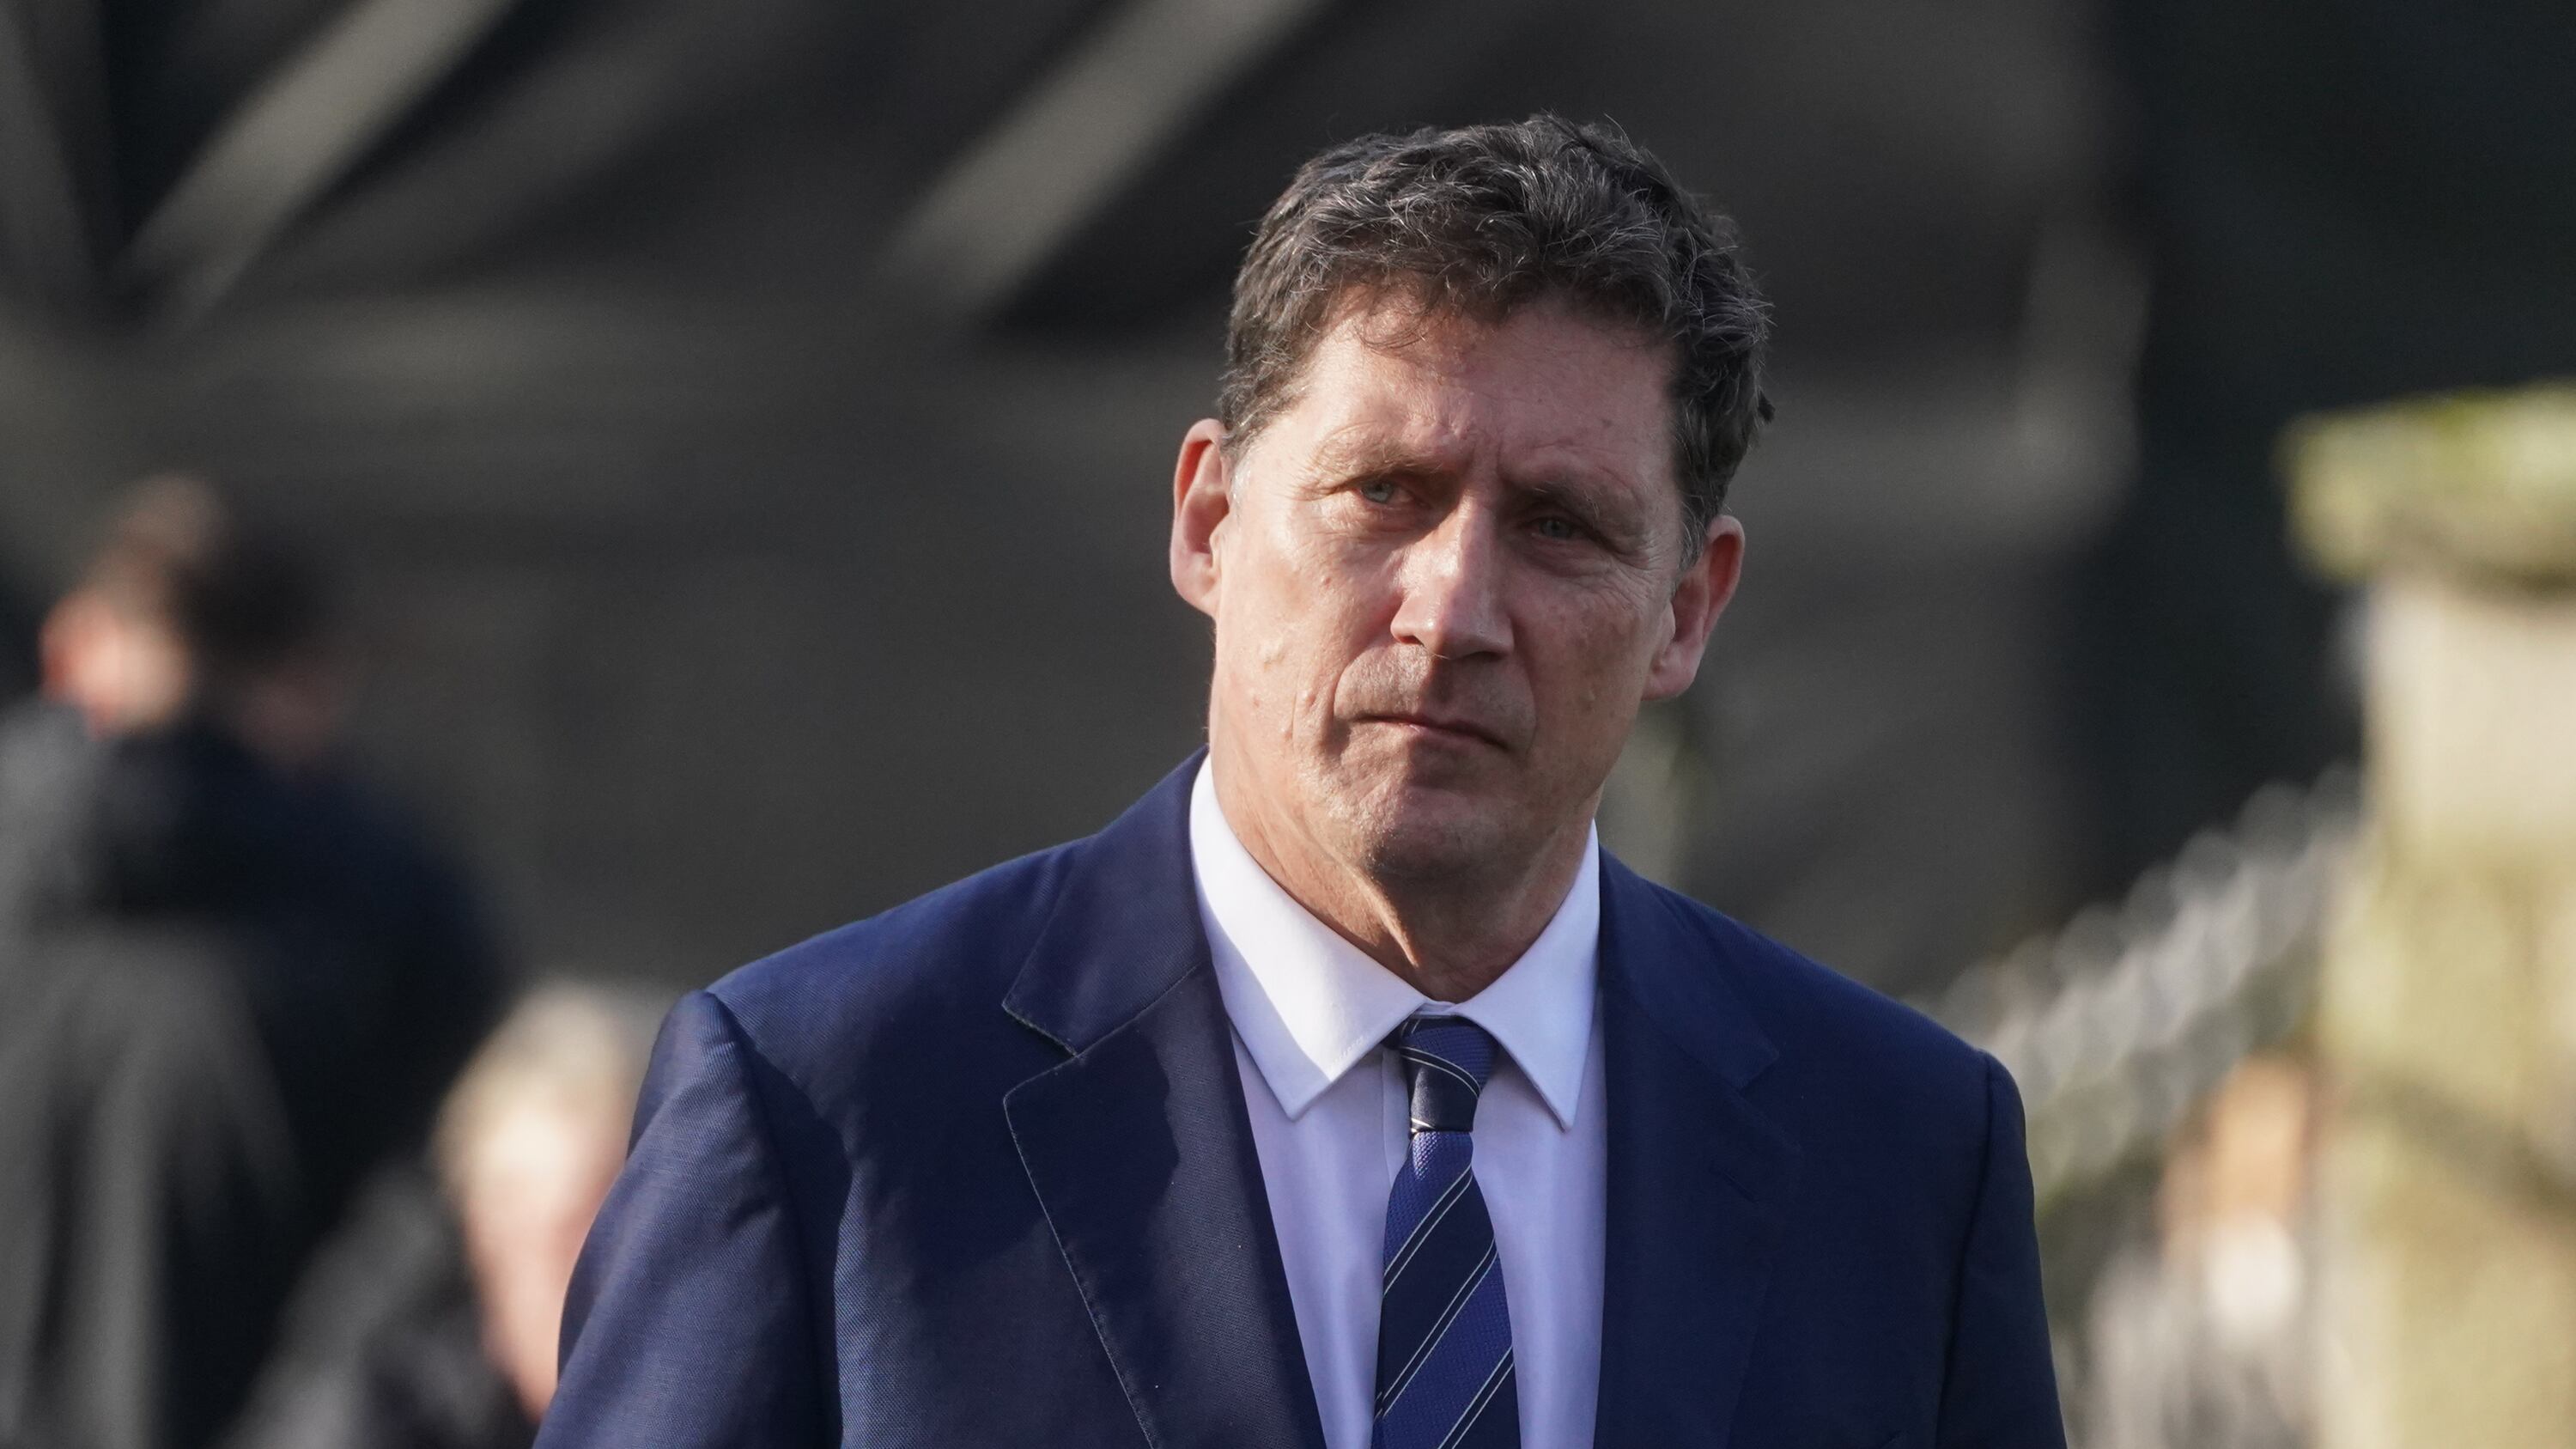 Eamon Ryan, of the Green Party, is the second coalition leader to resign this year